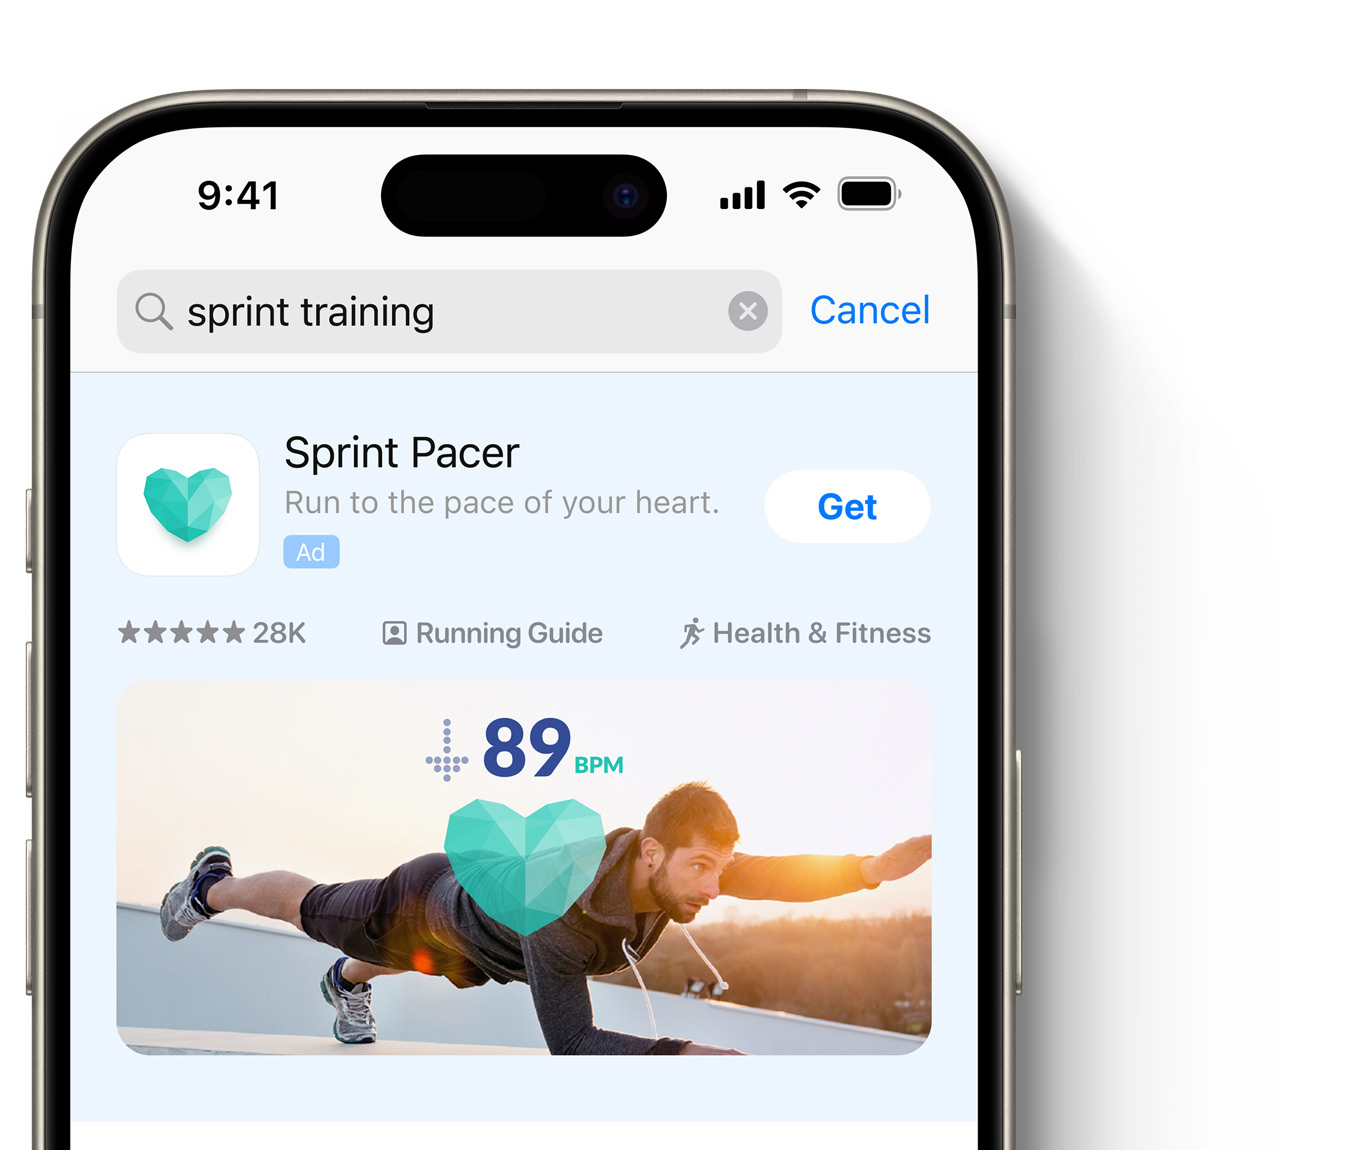 An ad for the app Sprint Pacer appears at the top of App Store search results.